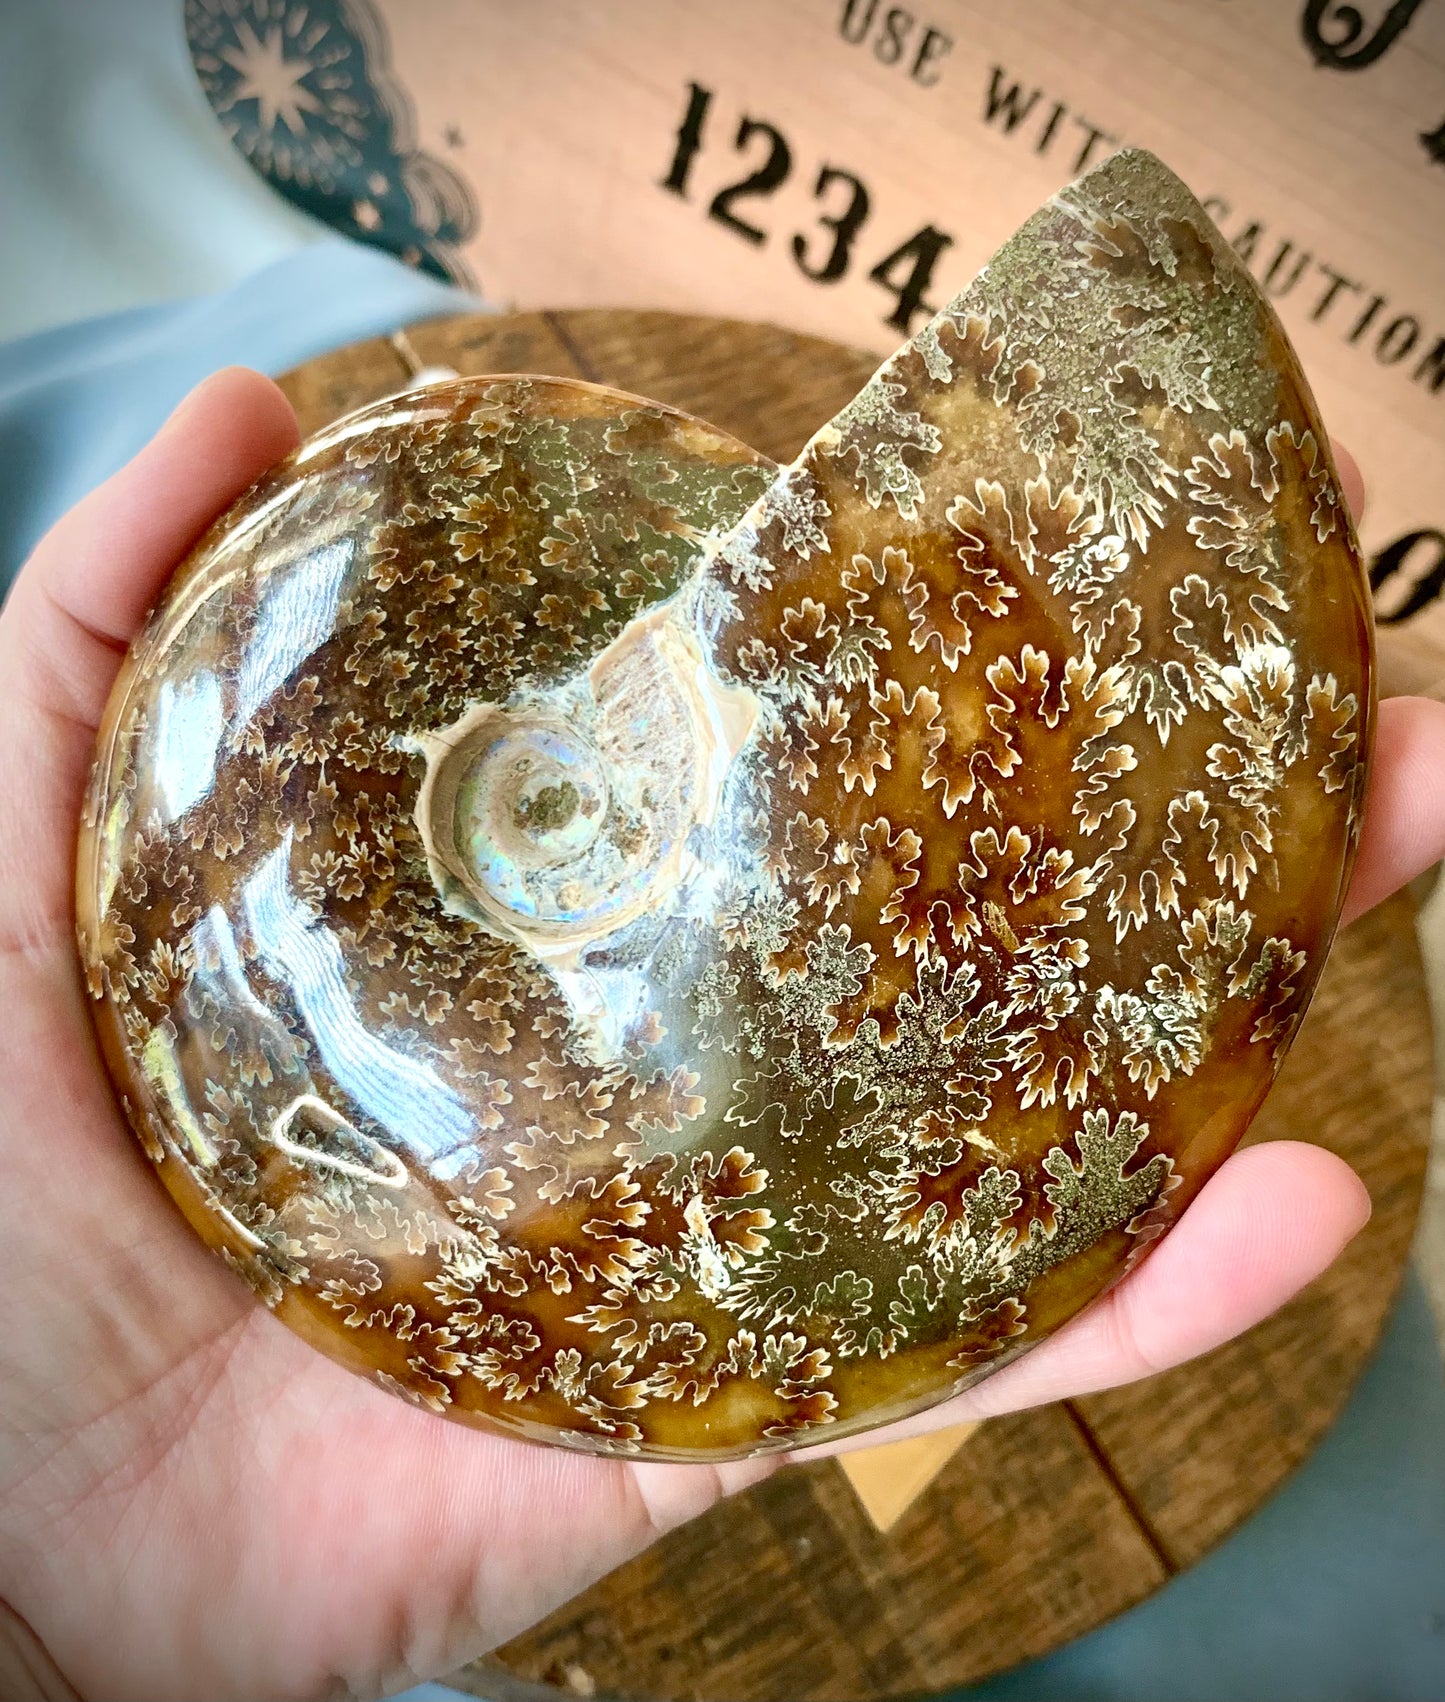 whole opalized ammonite fossil